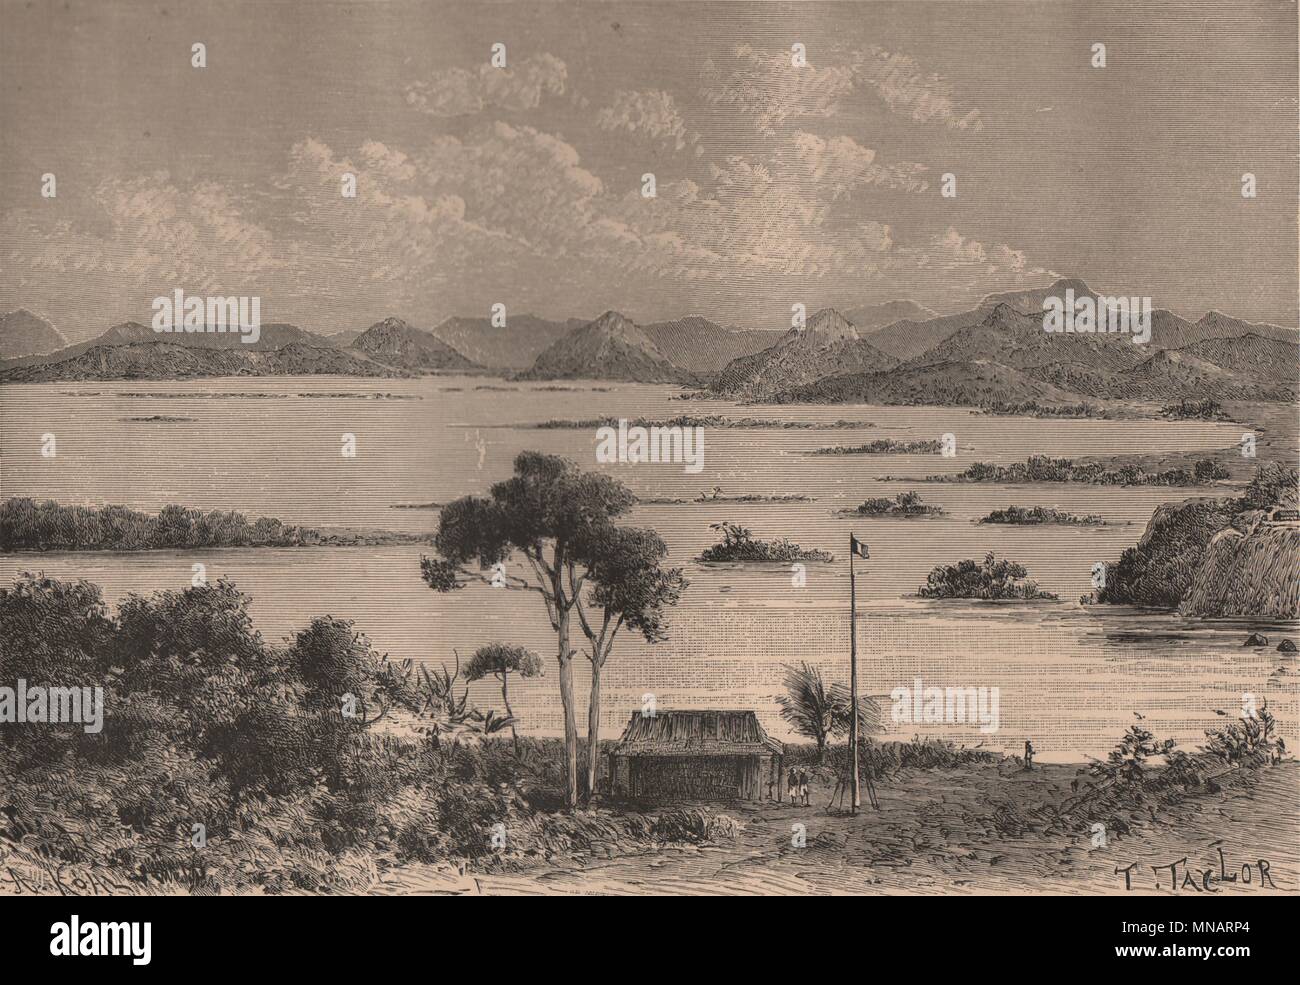 https://c8.alamy.com/comp/MNARP4/stanley-pool-pool-malenbo-view-from-brazzaville-congo-1885-old-print-MNARP4.jpg